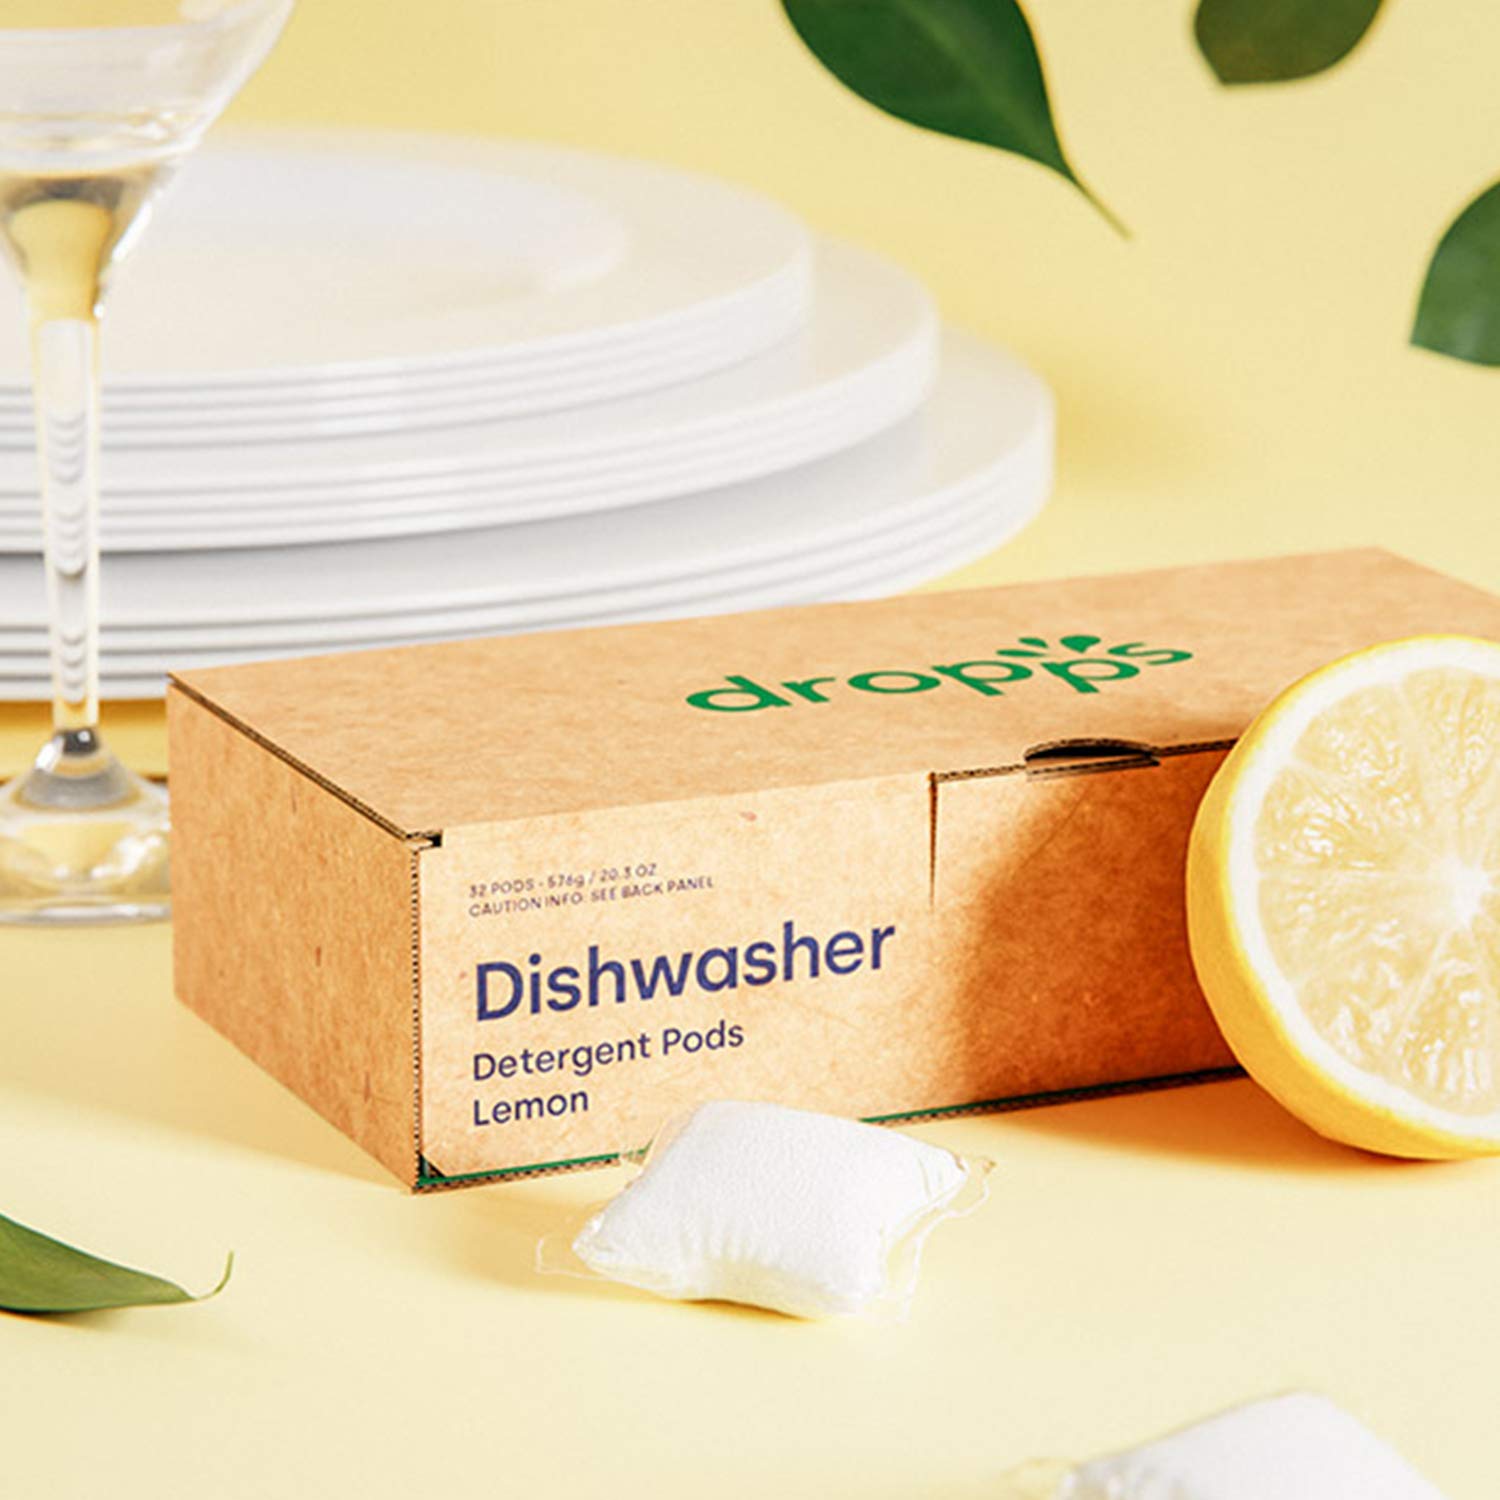 Dropps Dishwasher Detergent | Lemon, 64 Pods | Deep Cleans for Sparkling, Shiny Dishes| Low-Waste Packaging | No Rinse Aid or Pre-Wash Needed | Powered by Natural Mineral-Based Ingredients